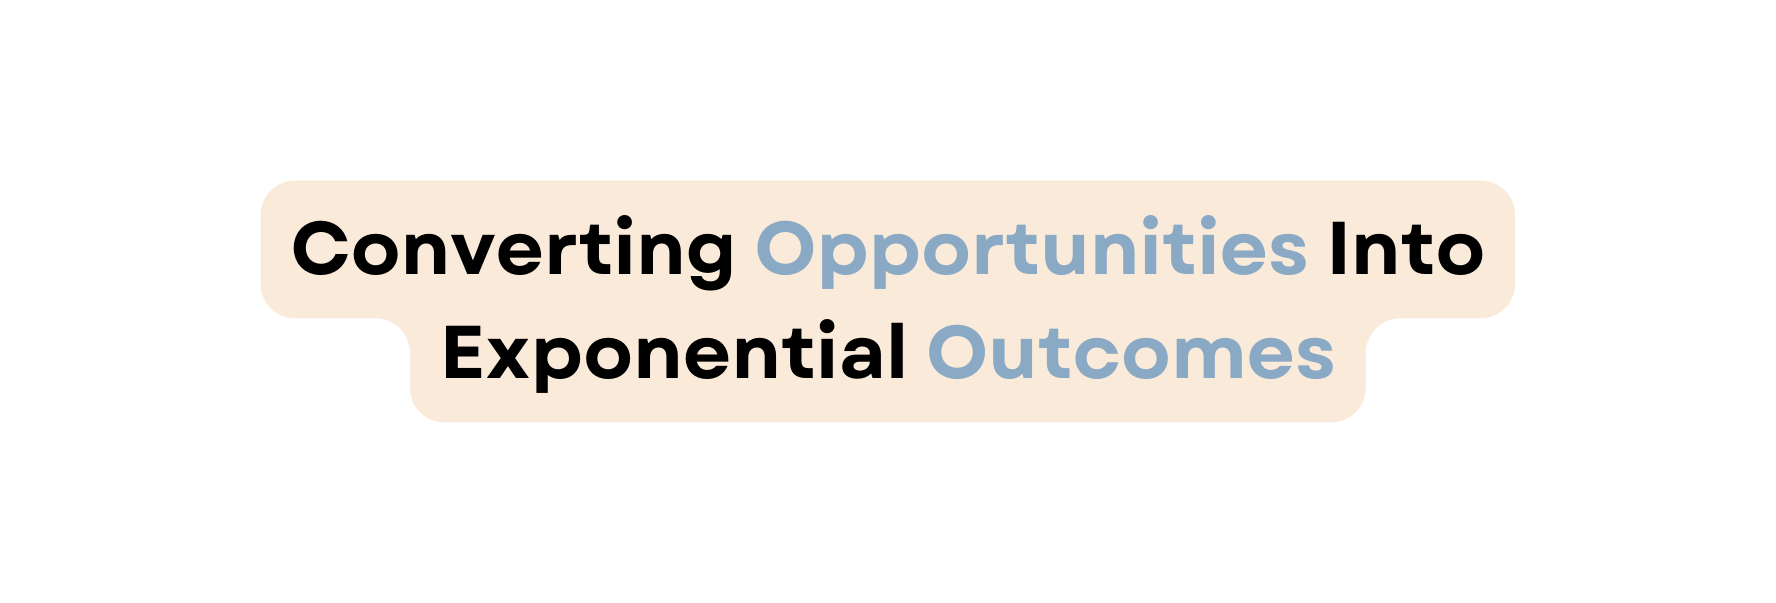 Converting Opportunities Into Exponential Outcomes